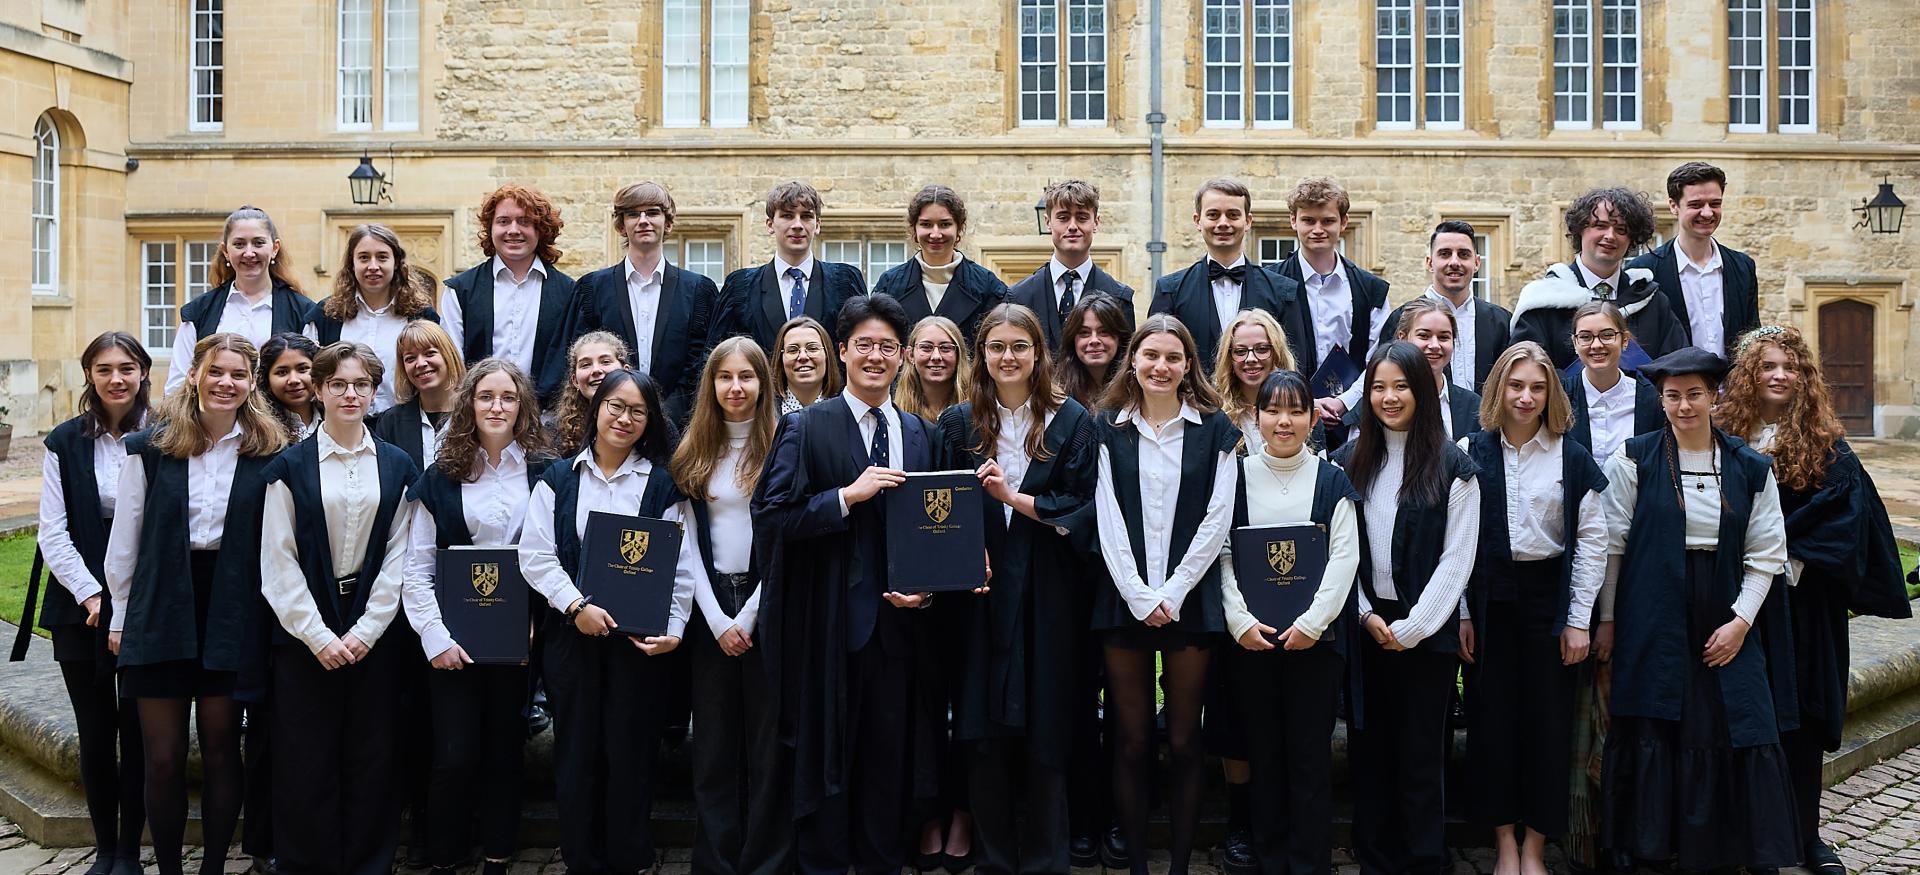 The Trinity chapel choir stand in sub fusc in the college's Durham quad.